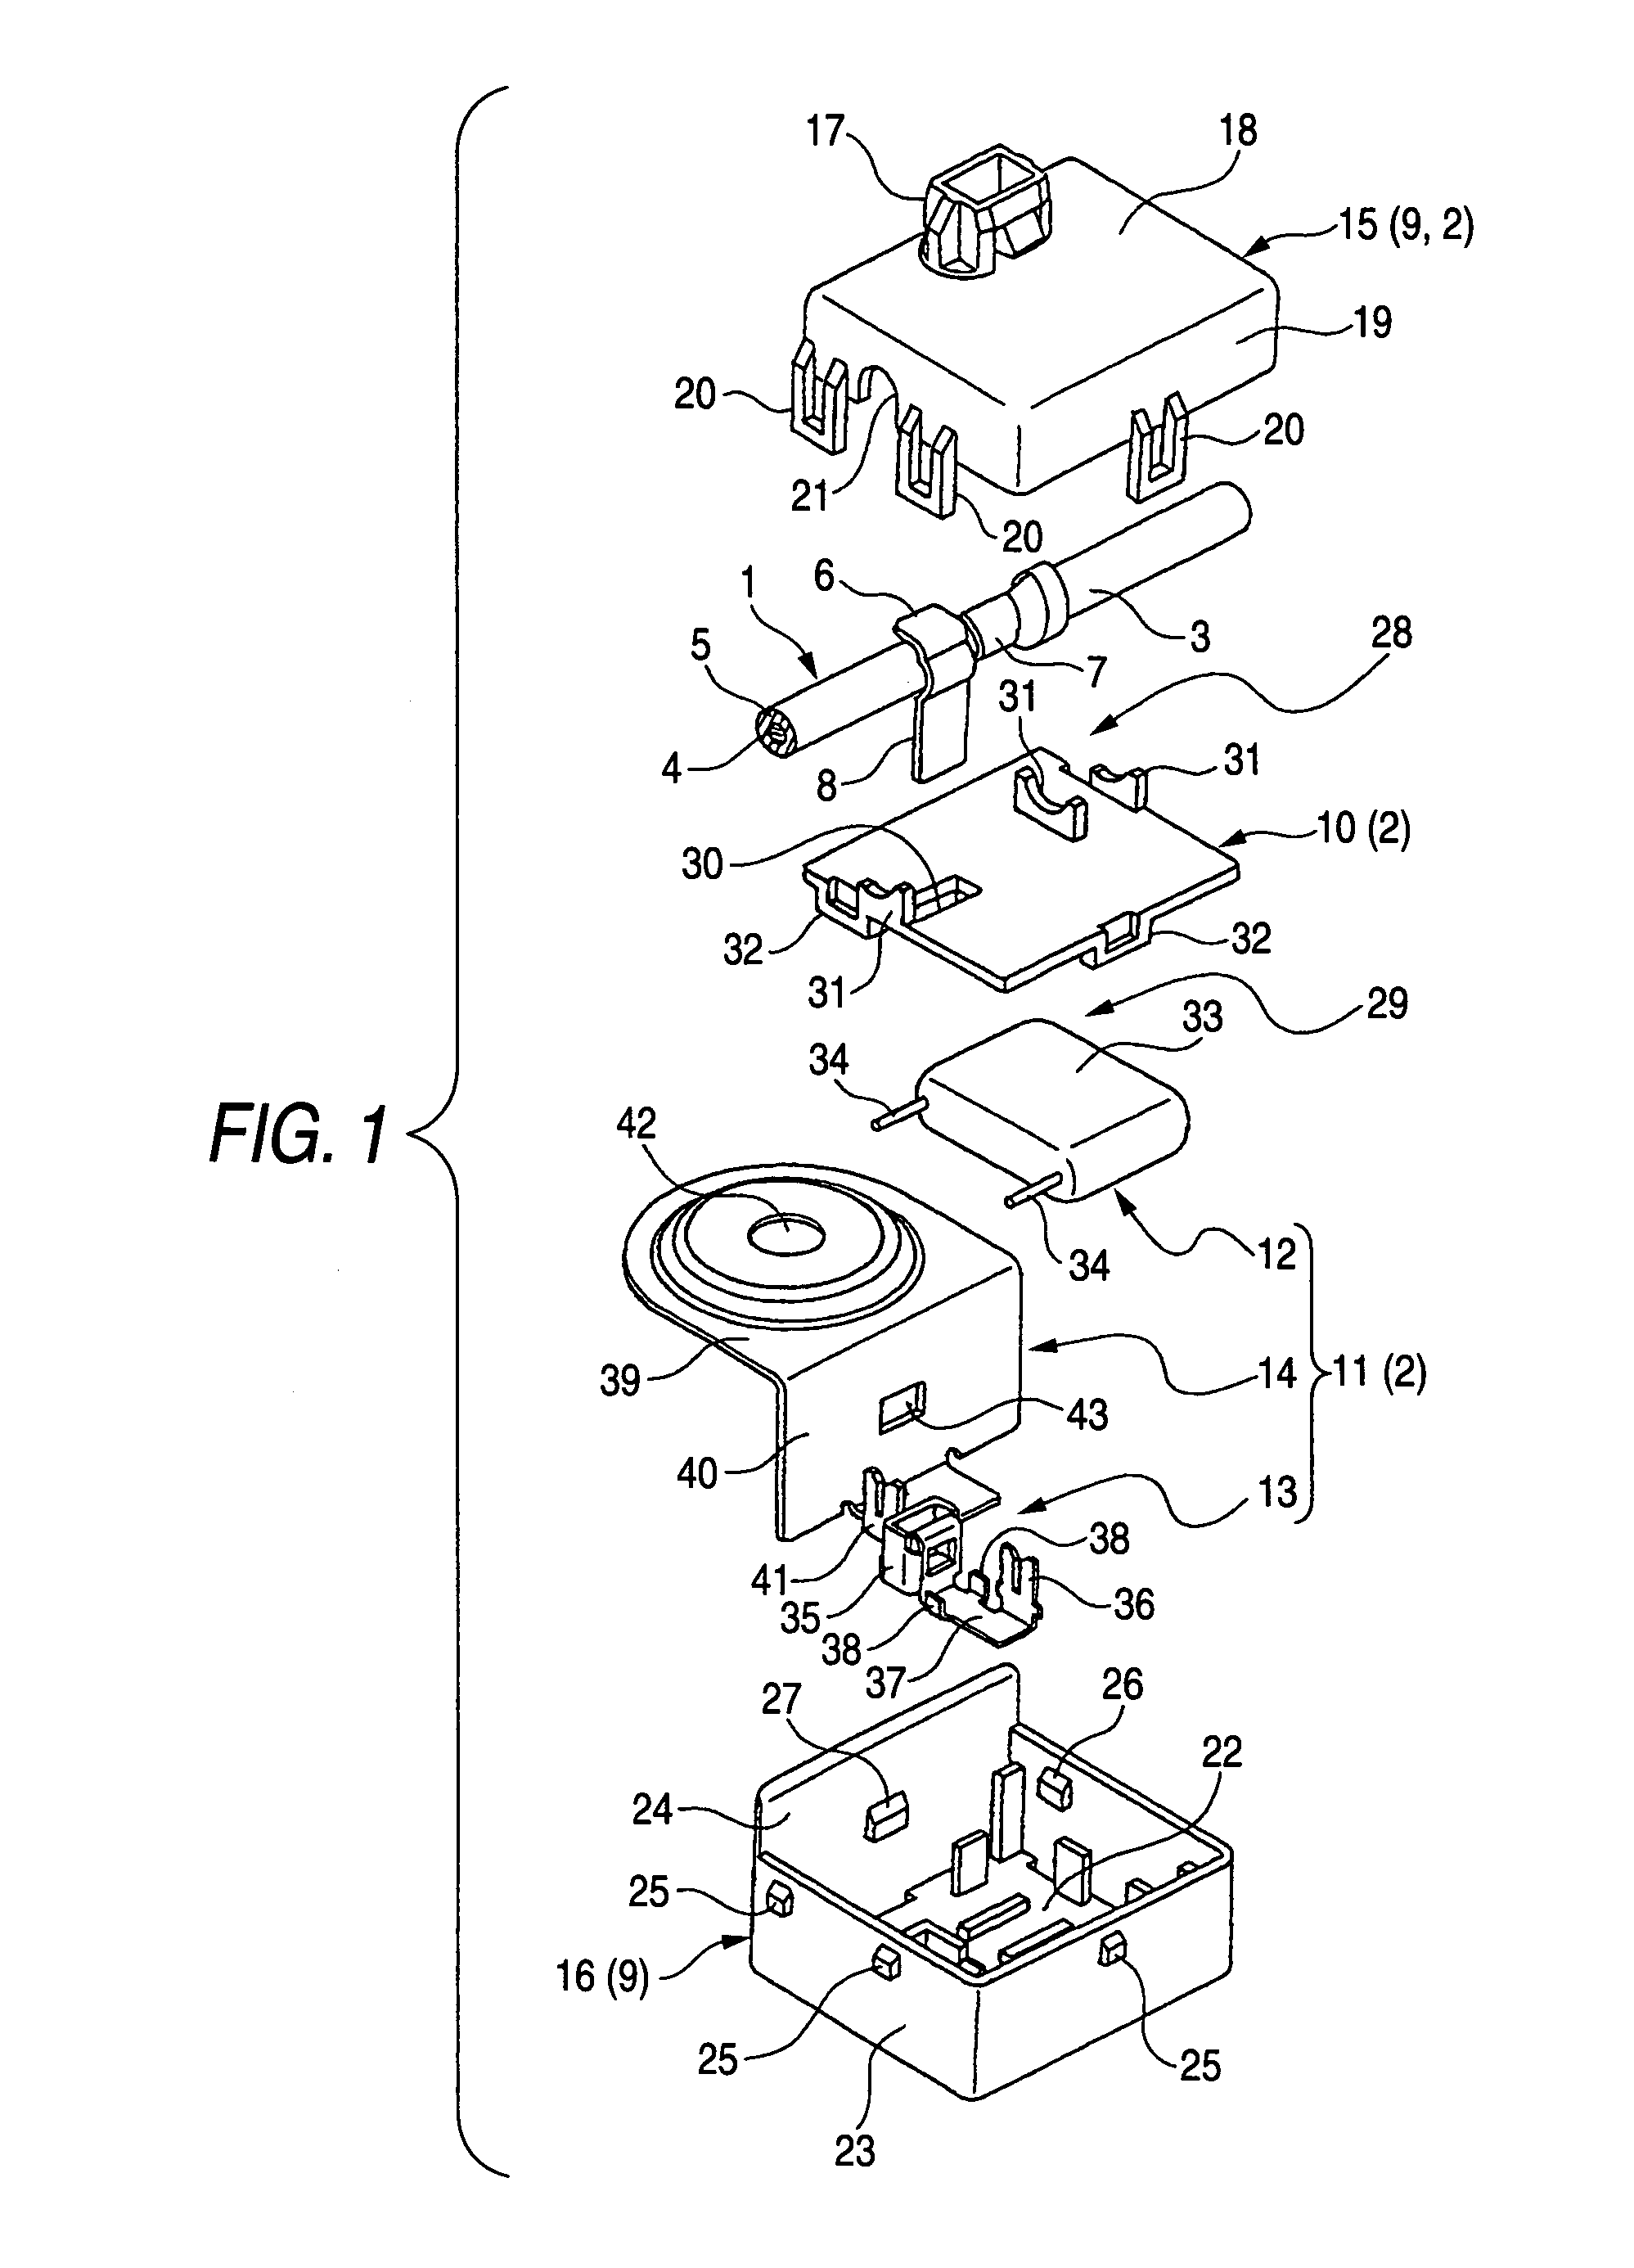 Structure of connecting wire to element-containing unit